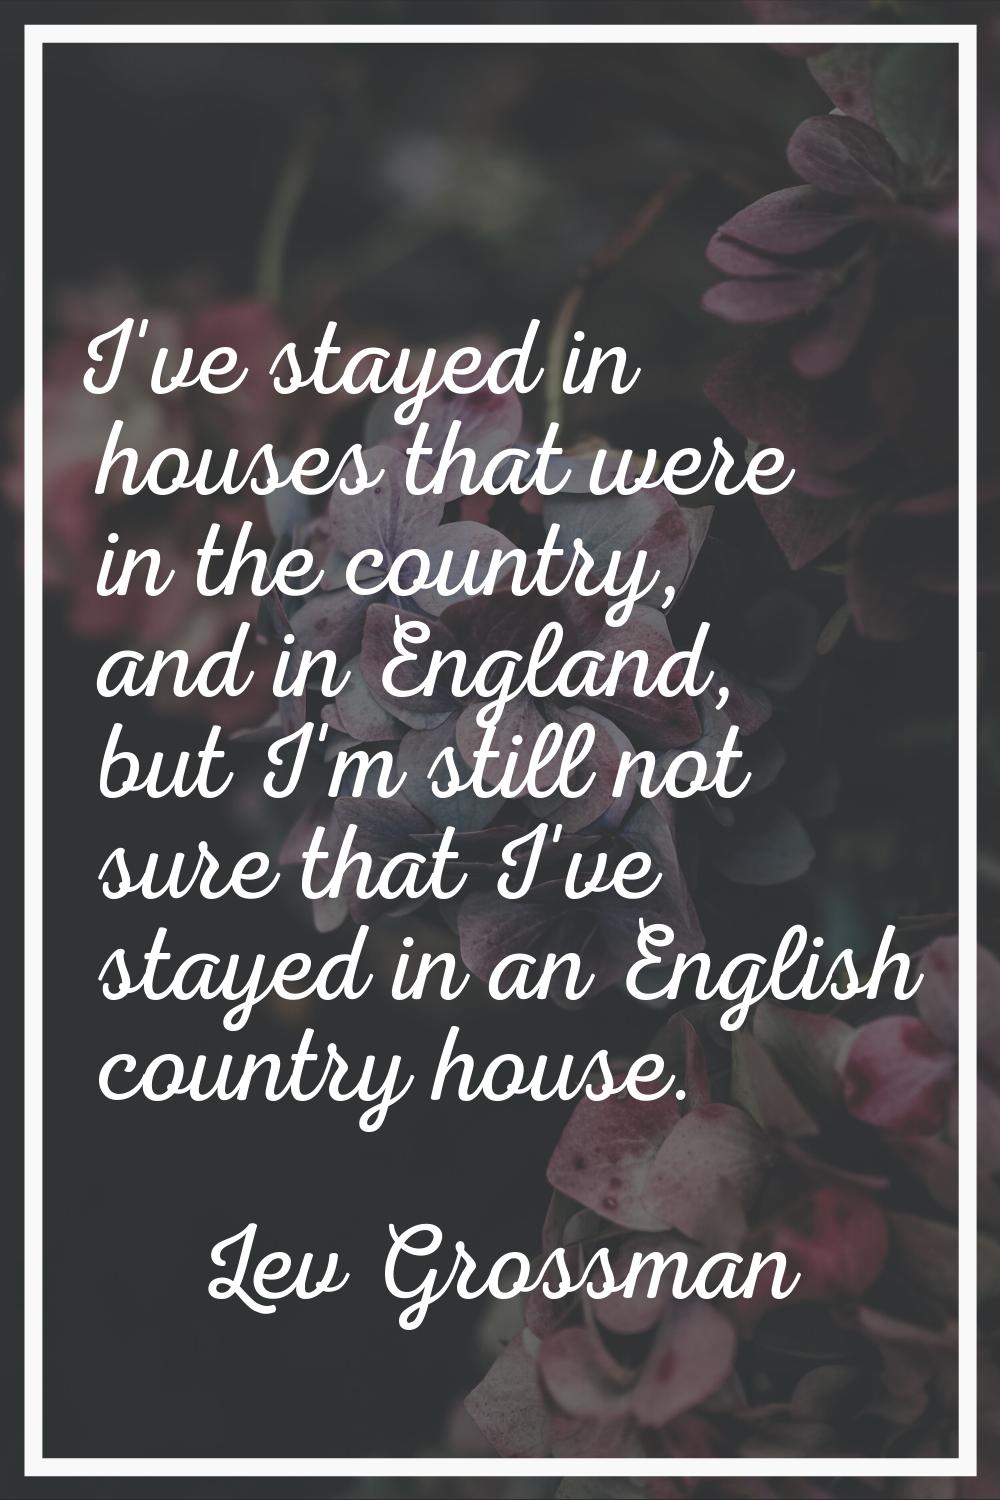 I've stayed in houses that were in the country, and in England, but I'm still not sure that I've st